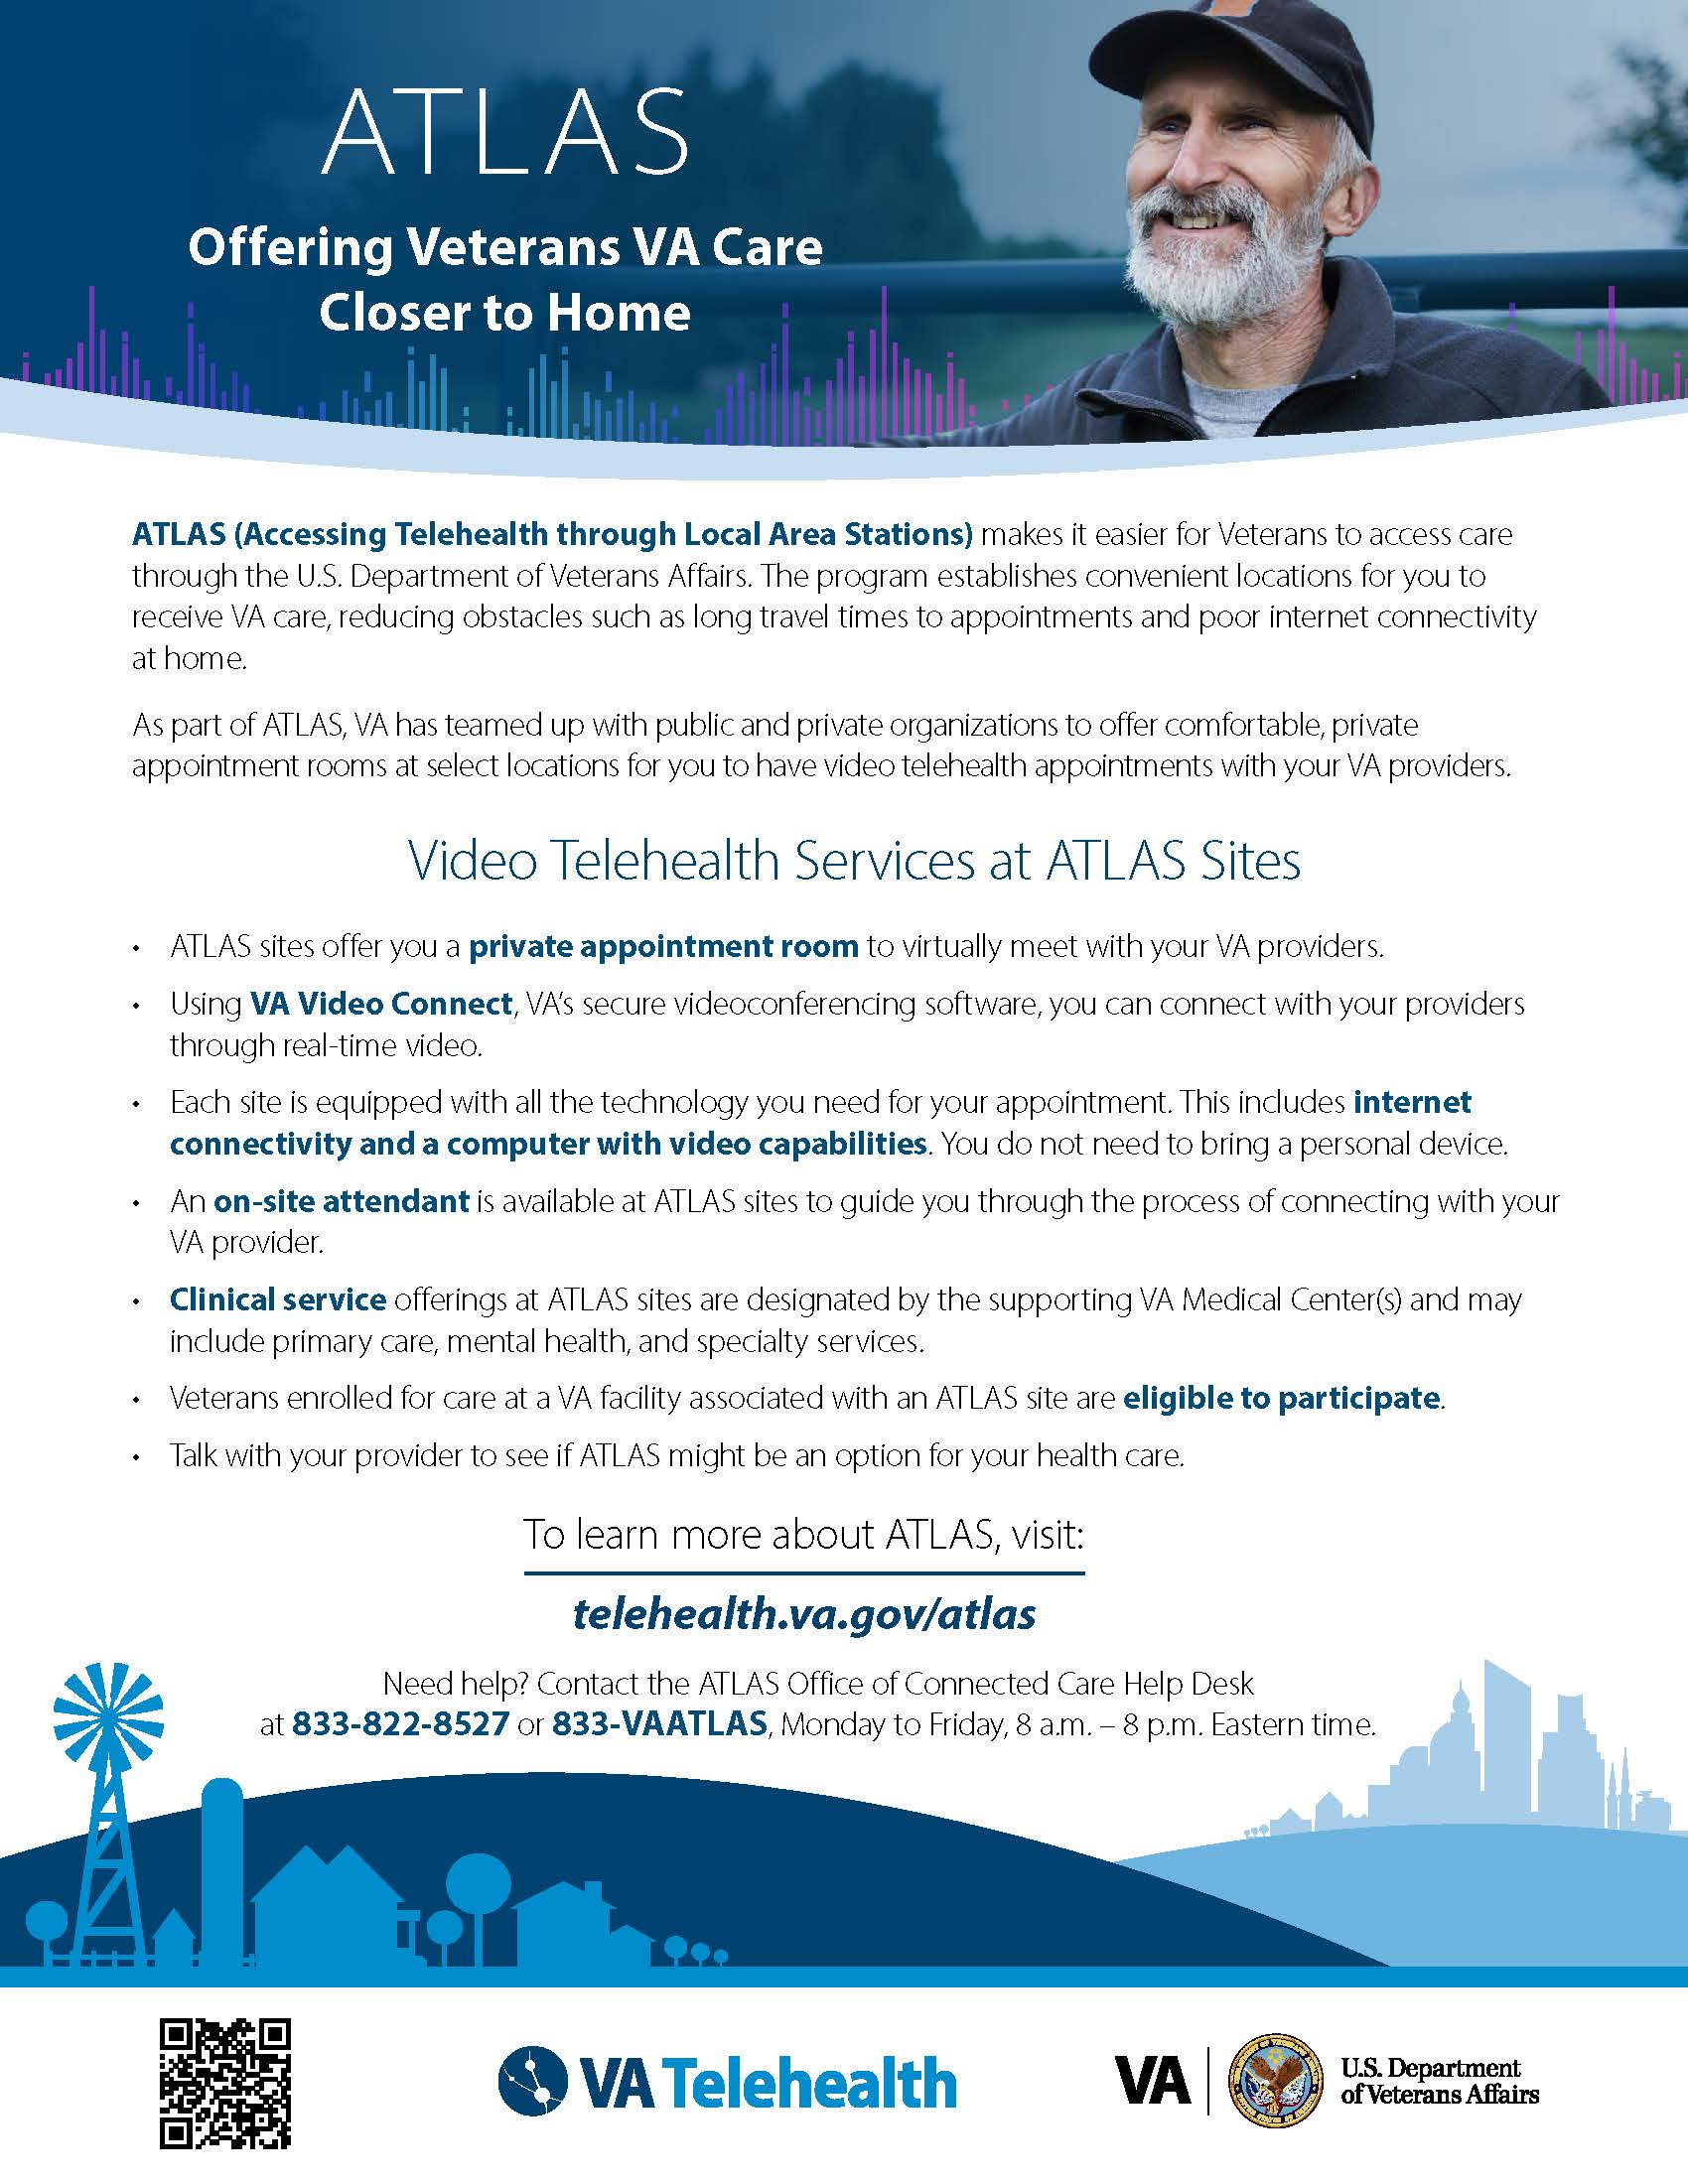 Thumbnail of the ATLAS Overview Flyer